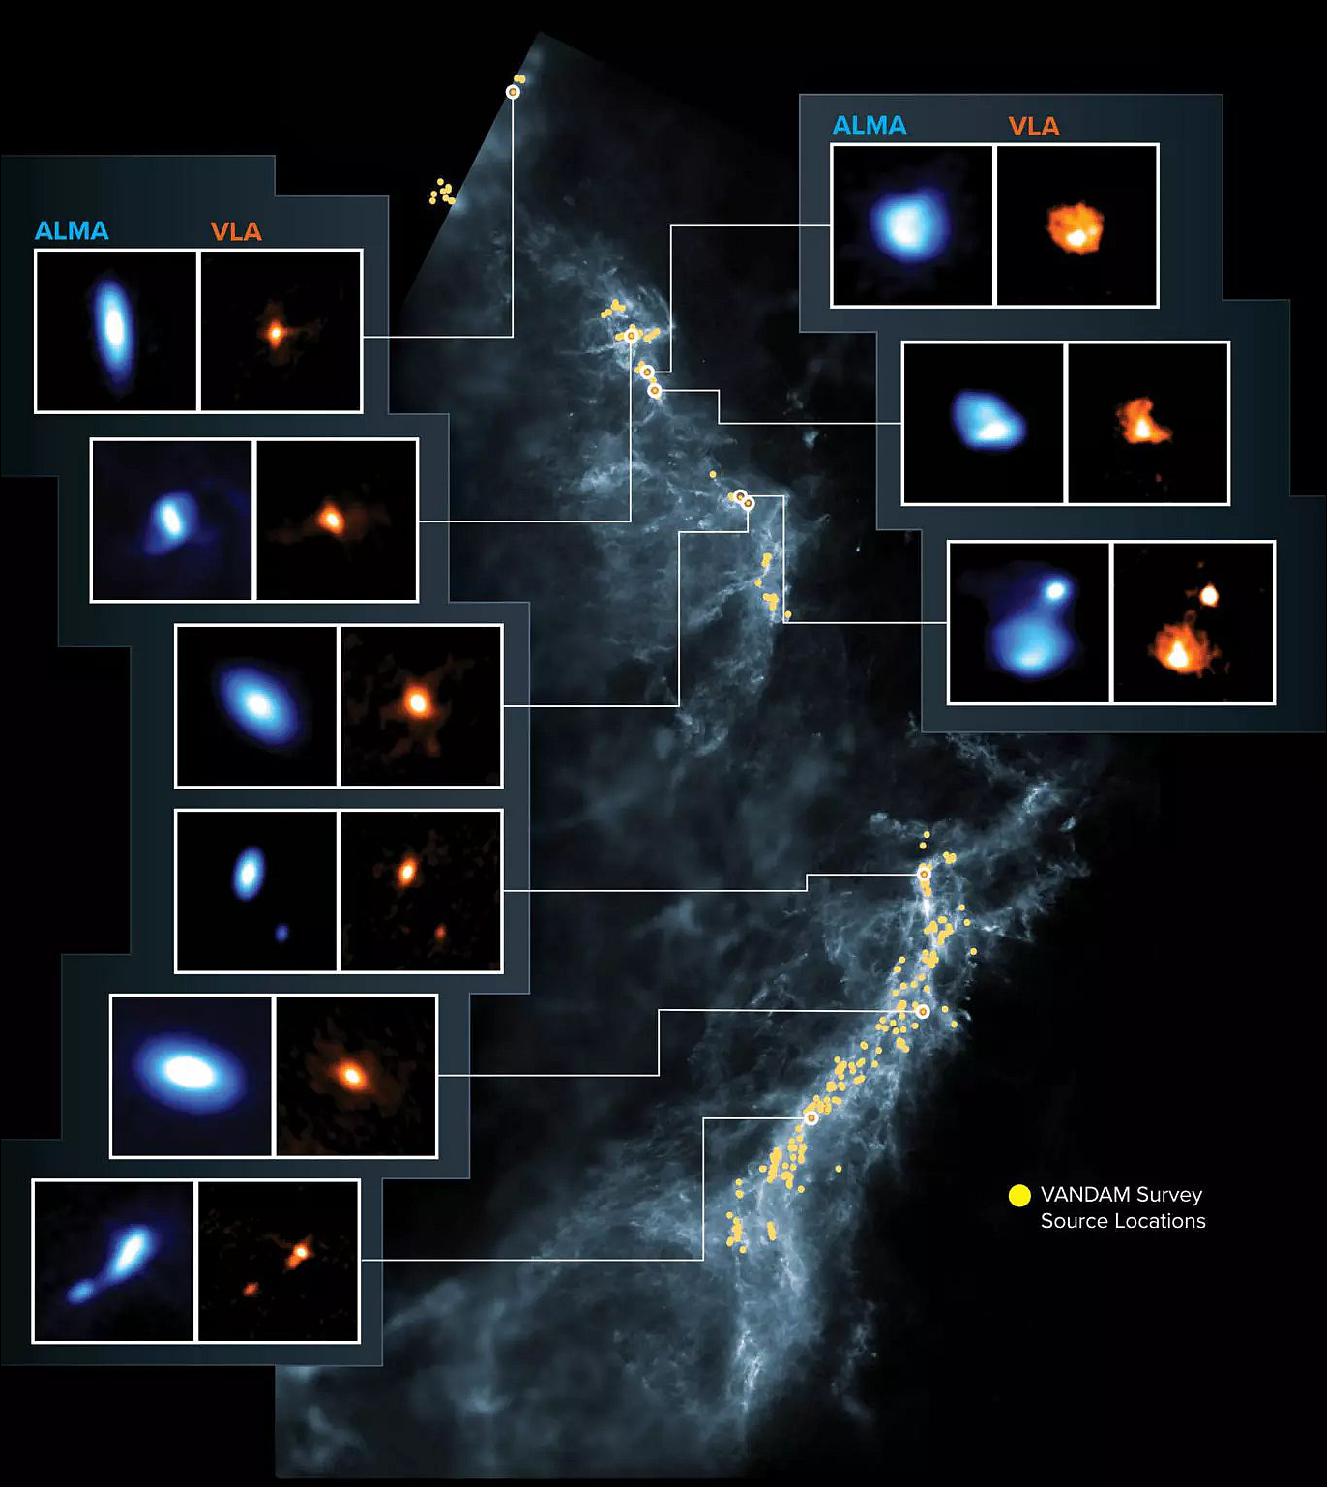 Figure 69: Observed protostars in Orion Molecular Clouds: This image shows the Orion Molecular Clouds, the target of the VANDAM survey. Yellow dots are the locations of the observed protostars on a blue background image made by Herschel. Side panels show nine young protostars imaged by ALMA (blue) and the VLA (orange) image credit: ALMA (ESO/NAOJ/NRAO), J. Tobin; NRAO/AUI/NSF, S. Dagnello; Herschel/ESA